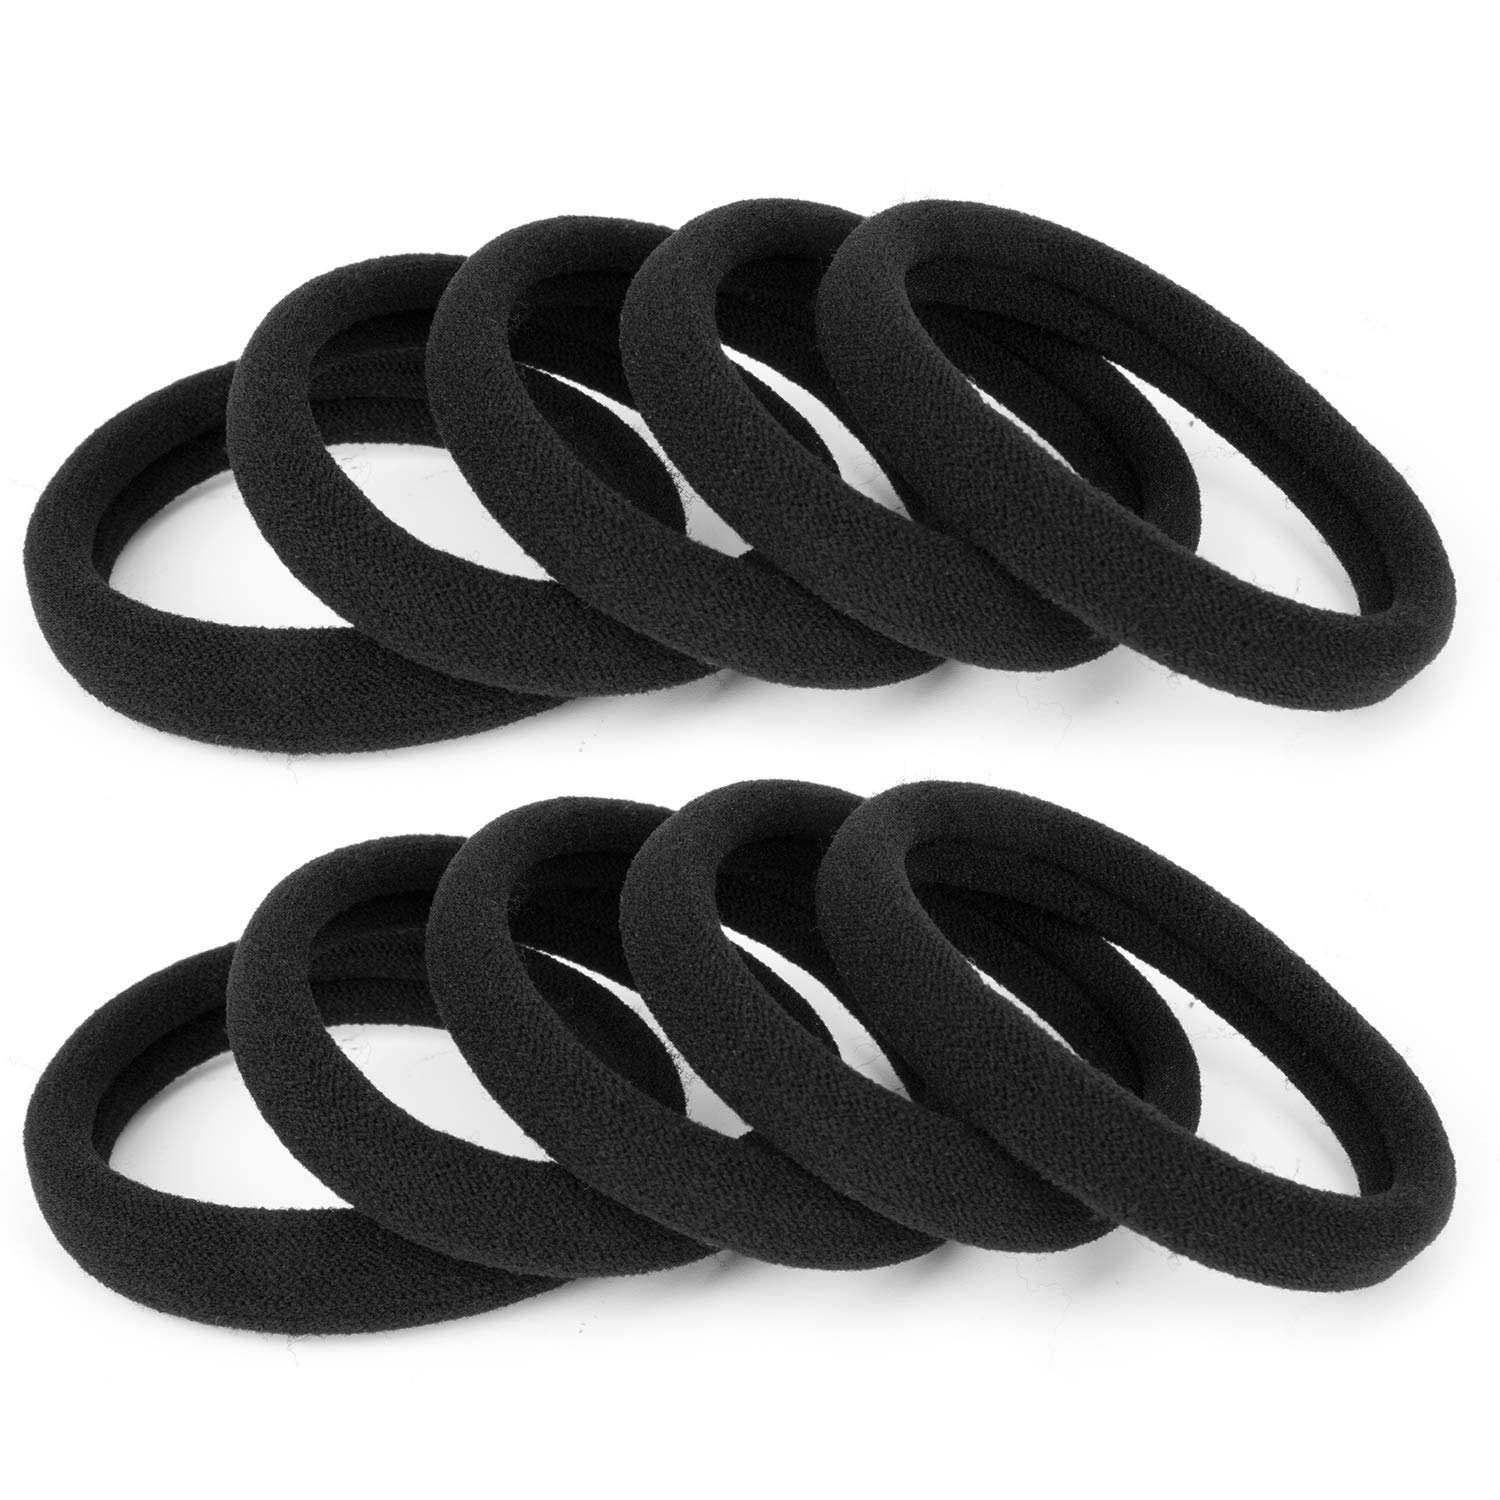 Mua 100PCS Large Black Hair Ties Band – Thick Cotton Seamless Ponytail  Holders – Hair Elastics Hair Bands for Thick Heavy and Curly Hair (2 Inch  in Diameter) by BAOLI trên Amazon